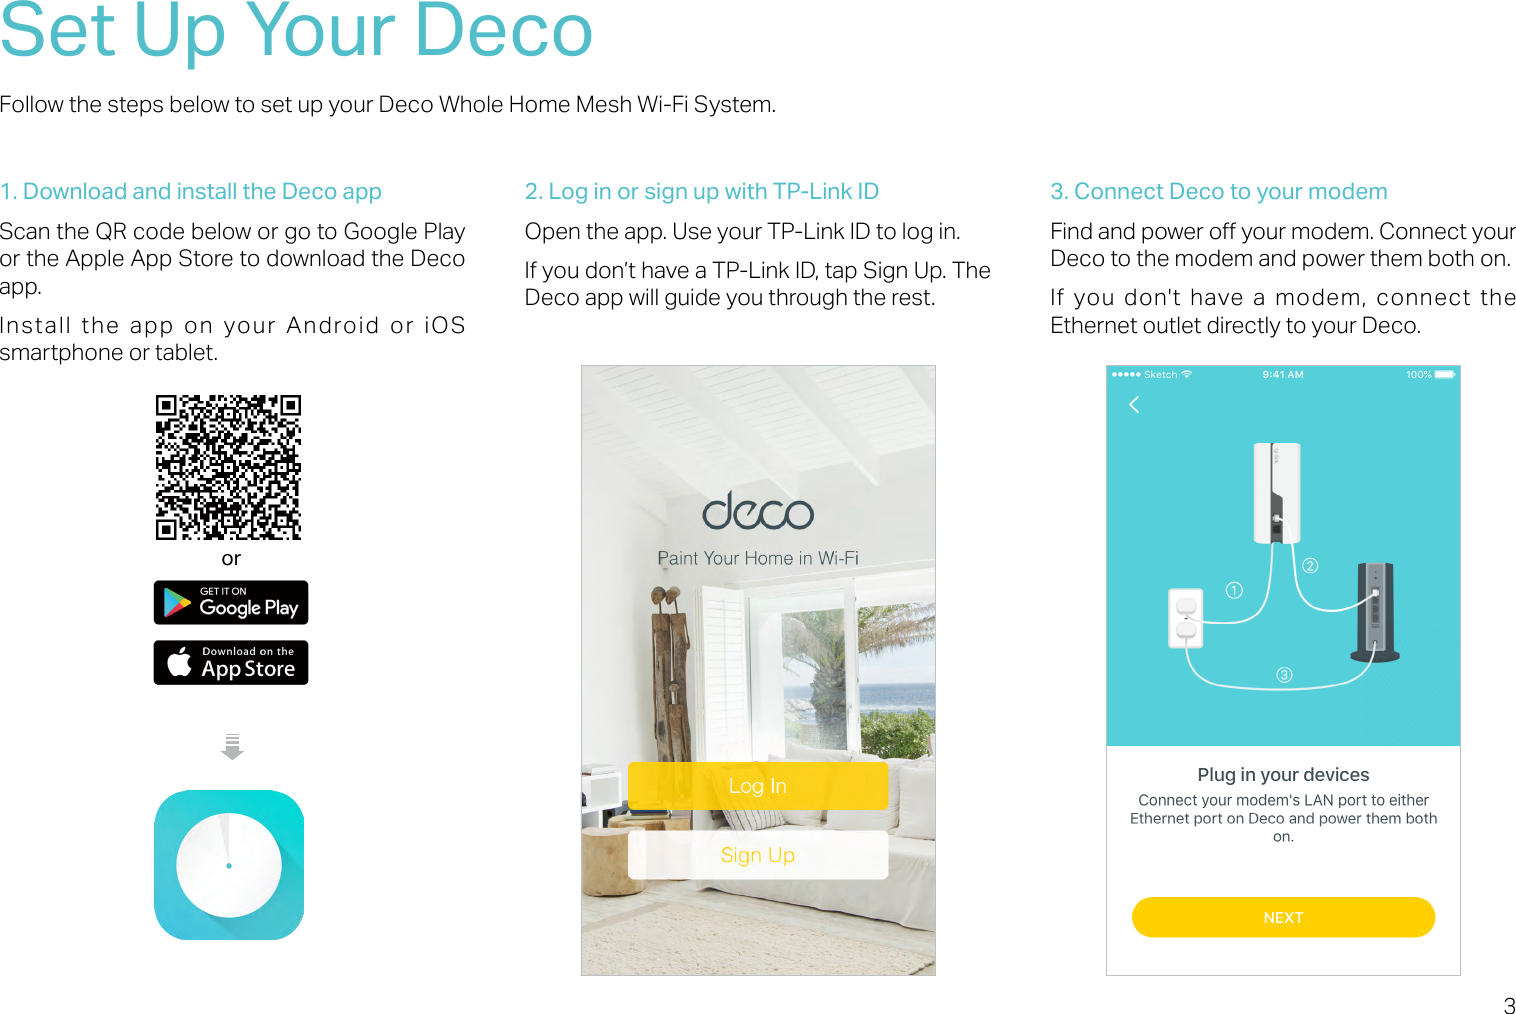 3Set Up Your DecoFollow the steps below to set up your Deco Whole Home Mesh Wi-Fi System.1. Download and install the Deco appScan the QR code below or go to Google Play or the Apple App Store to download the Deco app. Install the app on your Android or iOS smartphone or tablet.or2. Log in or sign up with TP-Link IDOpen the app. Use your TP-Link ID to log in. If you don’t have a TP-Link ID, tap Sign Up. The Deco app will guide you through the rest.3. Connect Deco to your modemFind and power o your modem. Connect your Deco to the modem and power them both on.If you don&apos;t have a modem, connect the Ethernet outlet directly to your Deco.